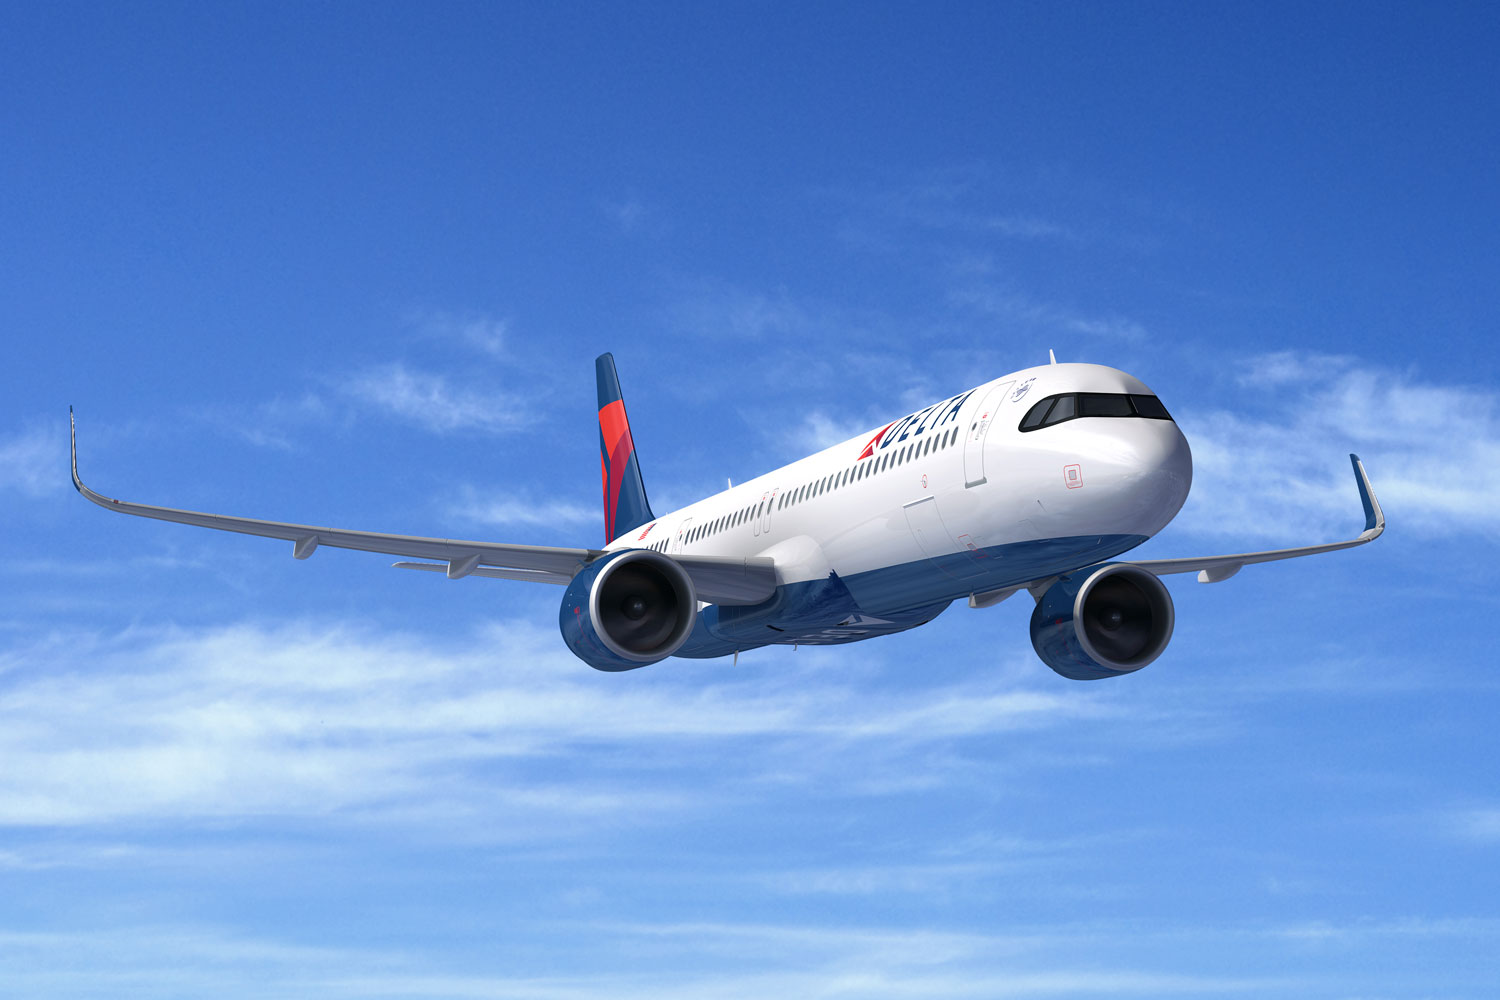 Delta Air Lines expands A321neo order to 155 aircraft - Air Data News